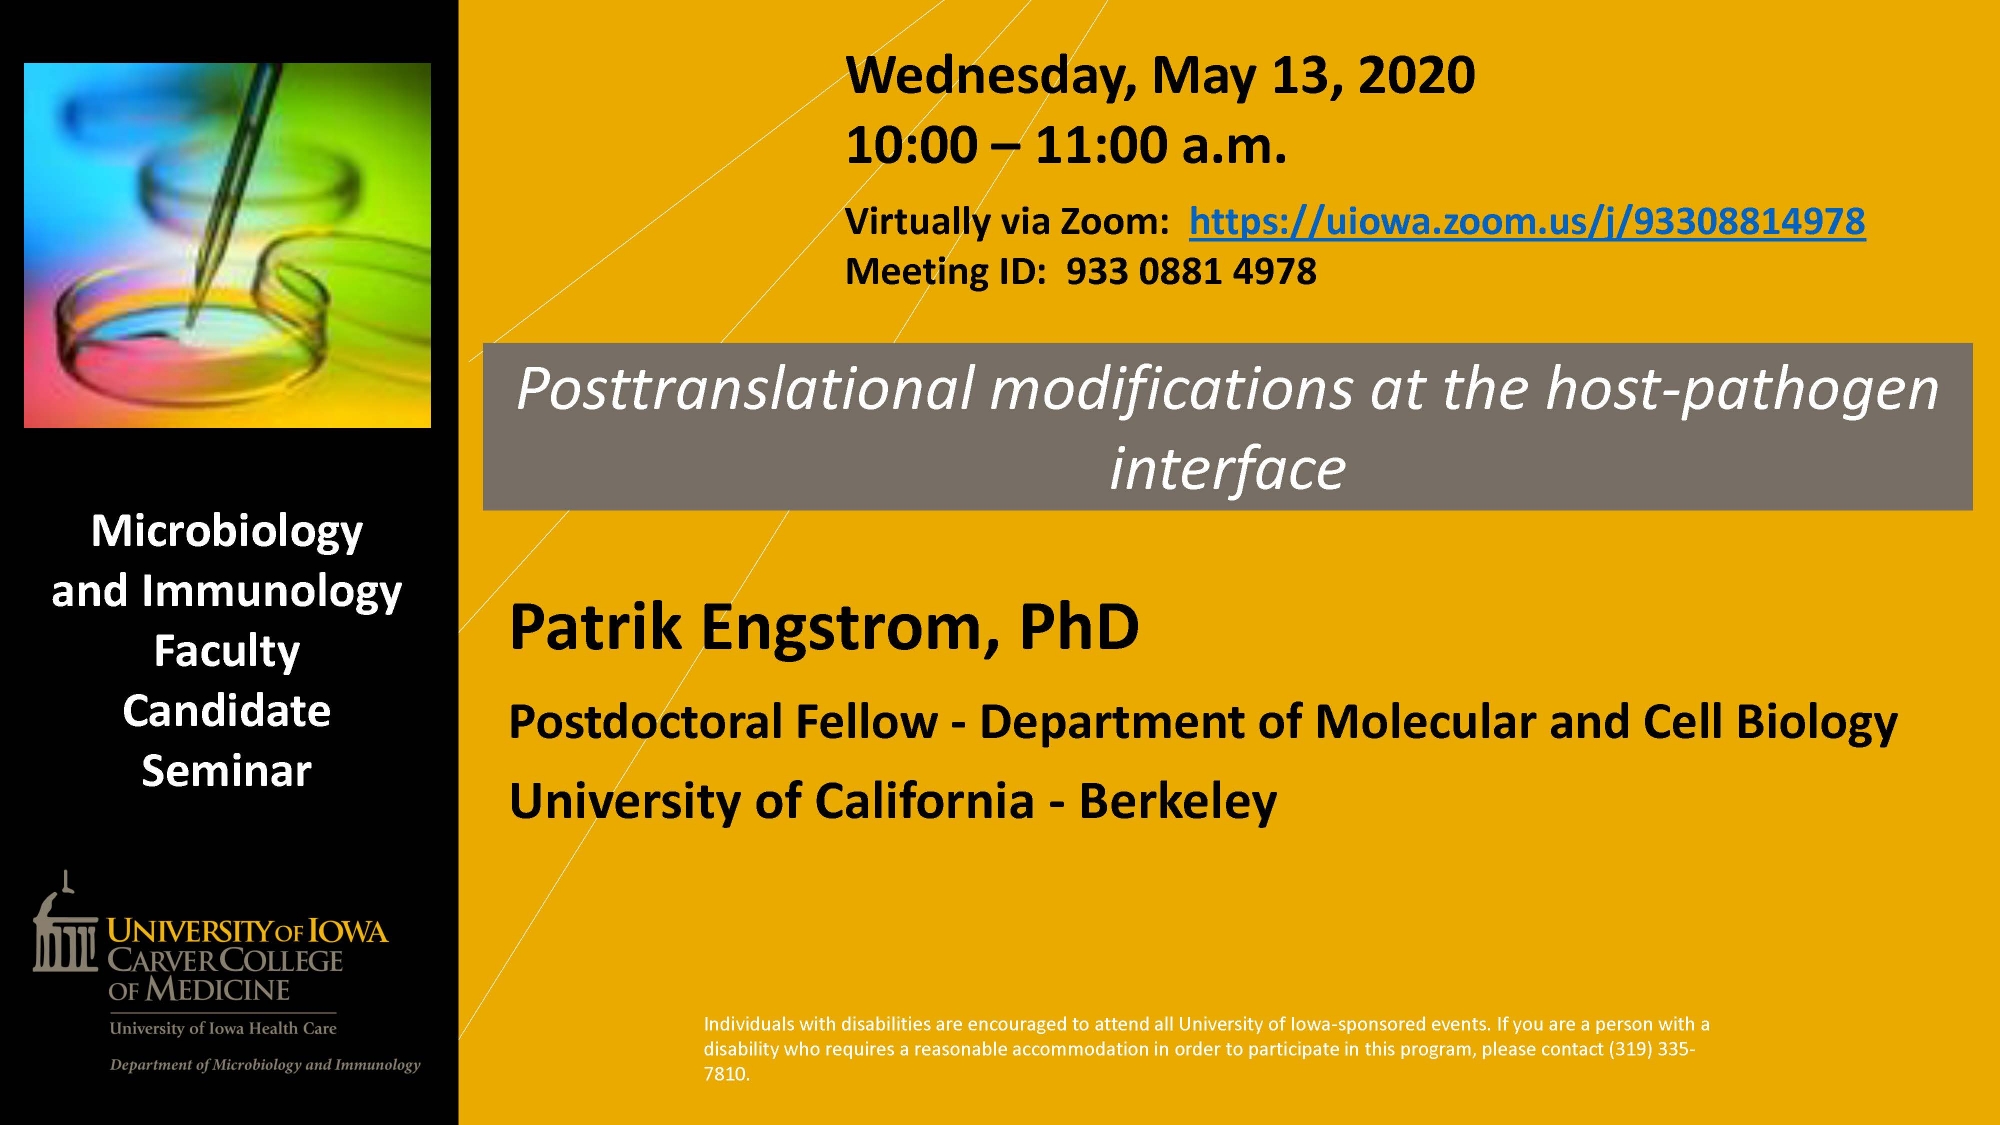 Faculty Candidate - Patrick Engstrom